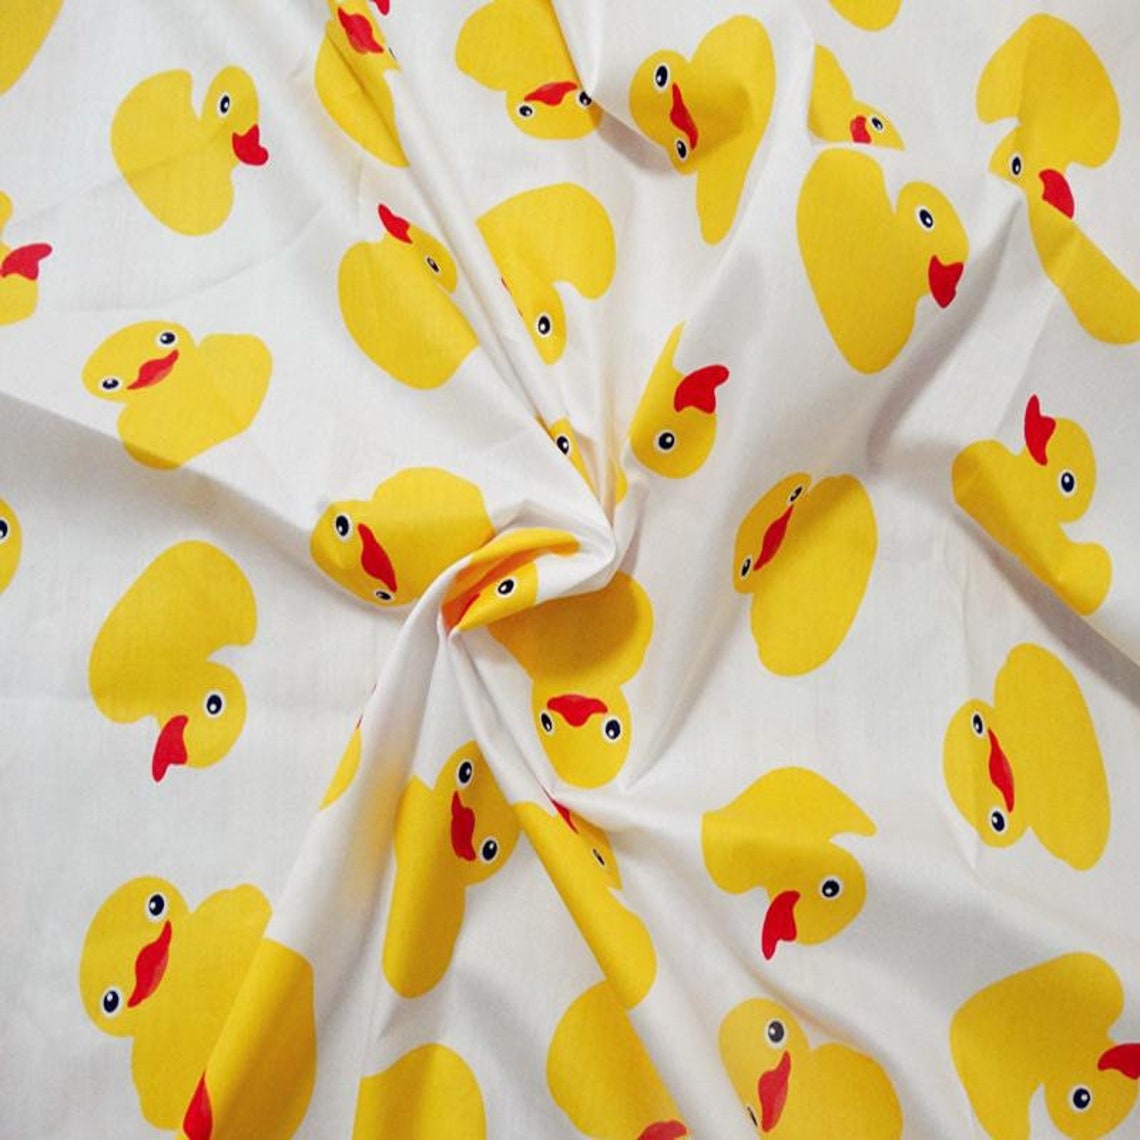 Ducks on White Cotton Fabric Rubber Duck Pattern Fabric Cute | Etsy